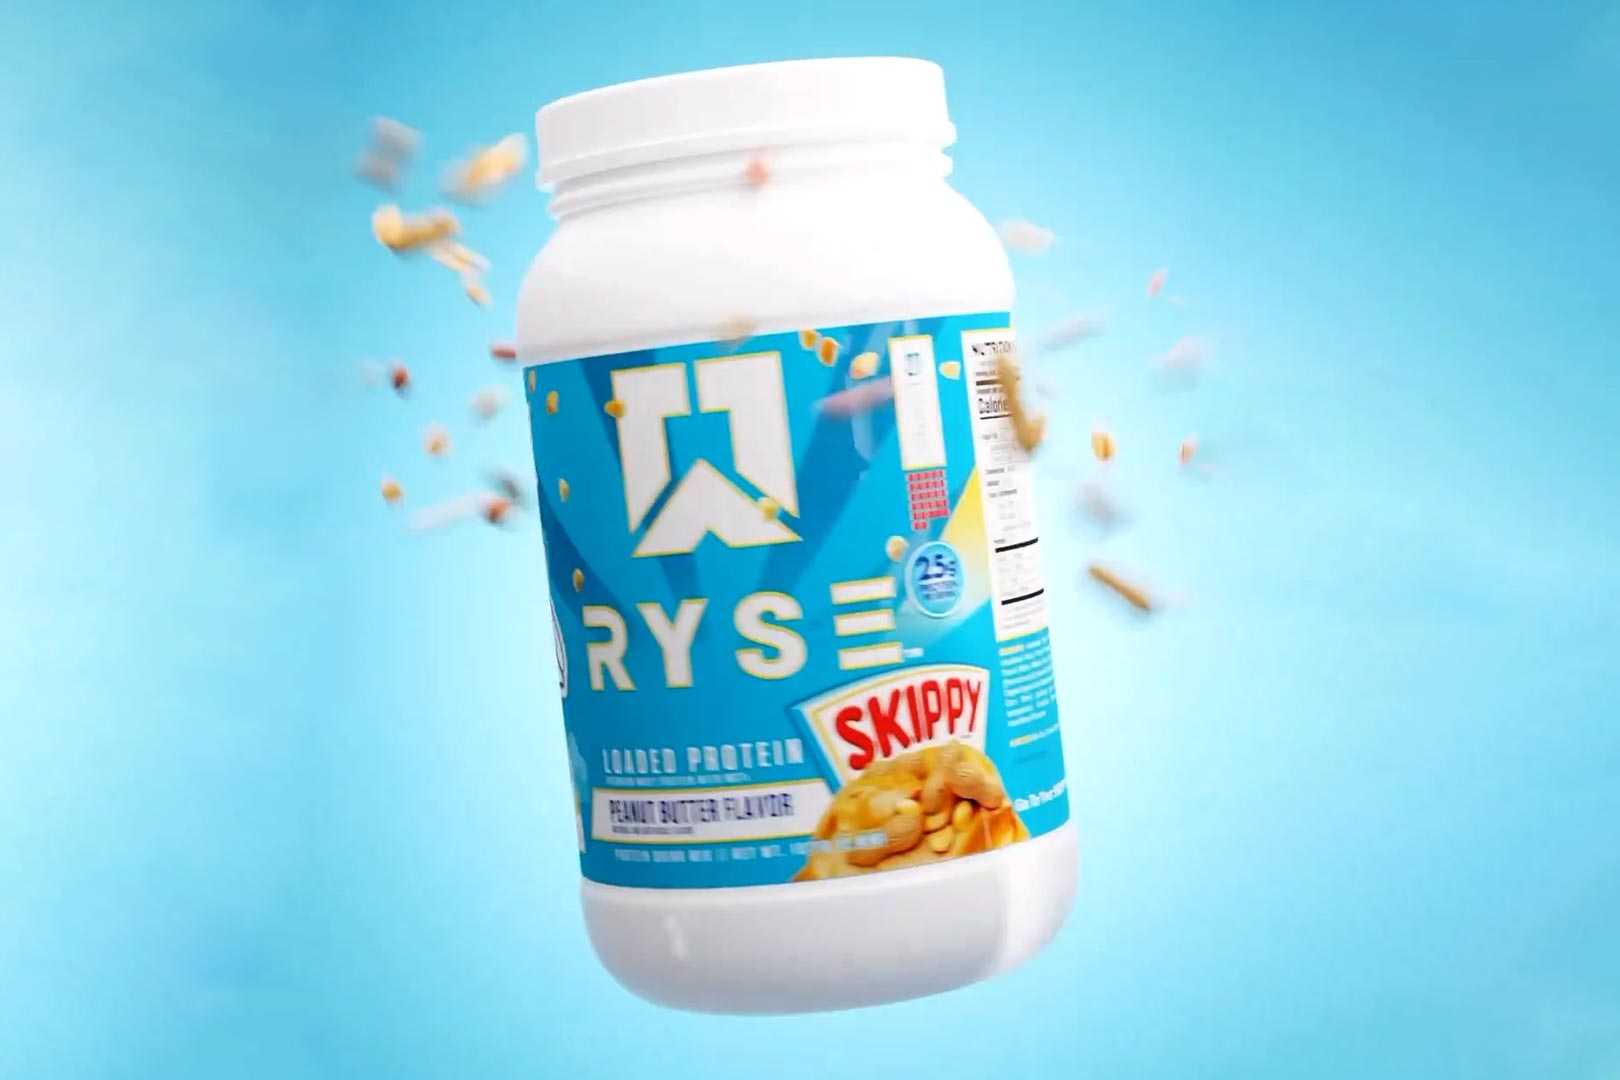 Ryse Skippy Peanut Butter Loaded Protein